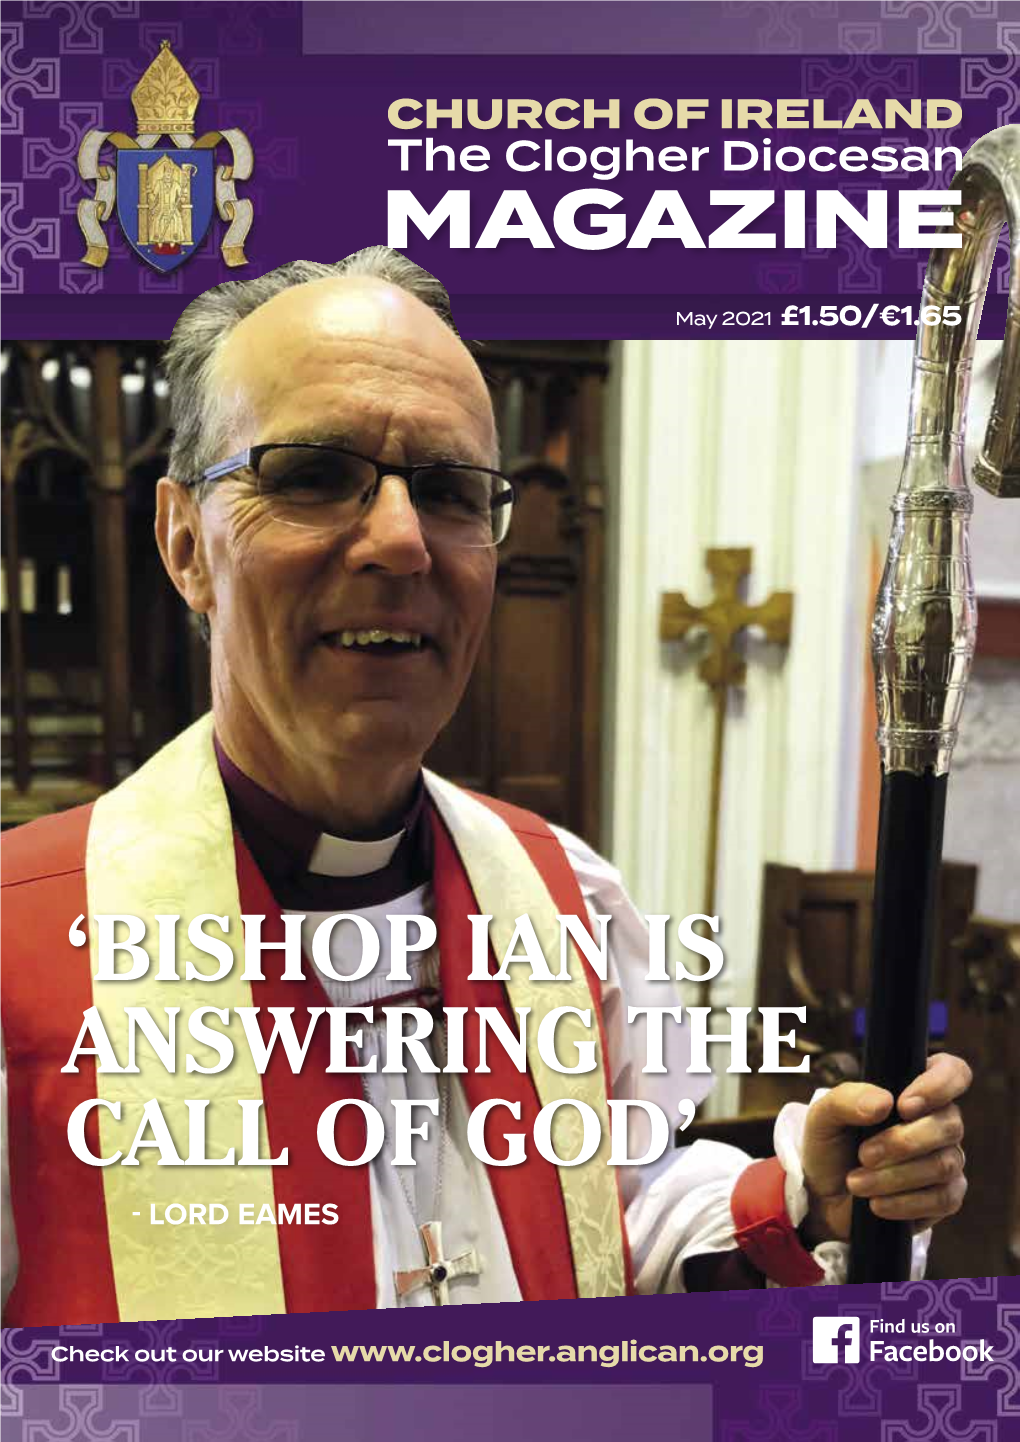 'Bishop Ian Is Answering the Call of God'